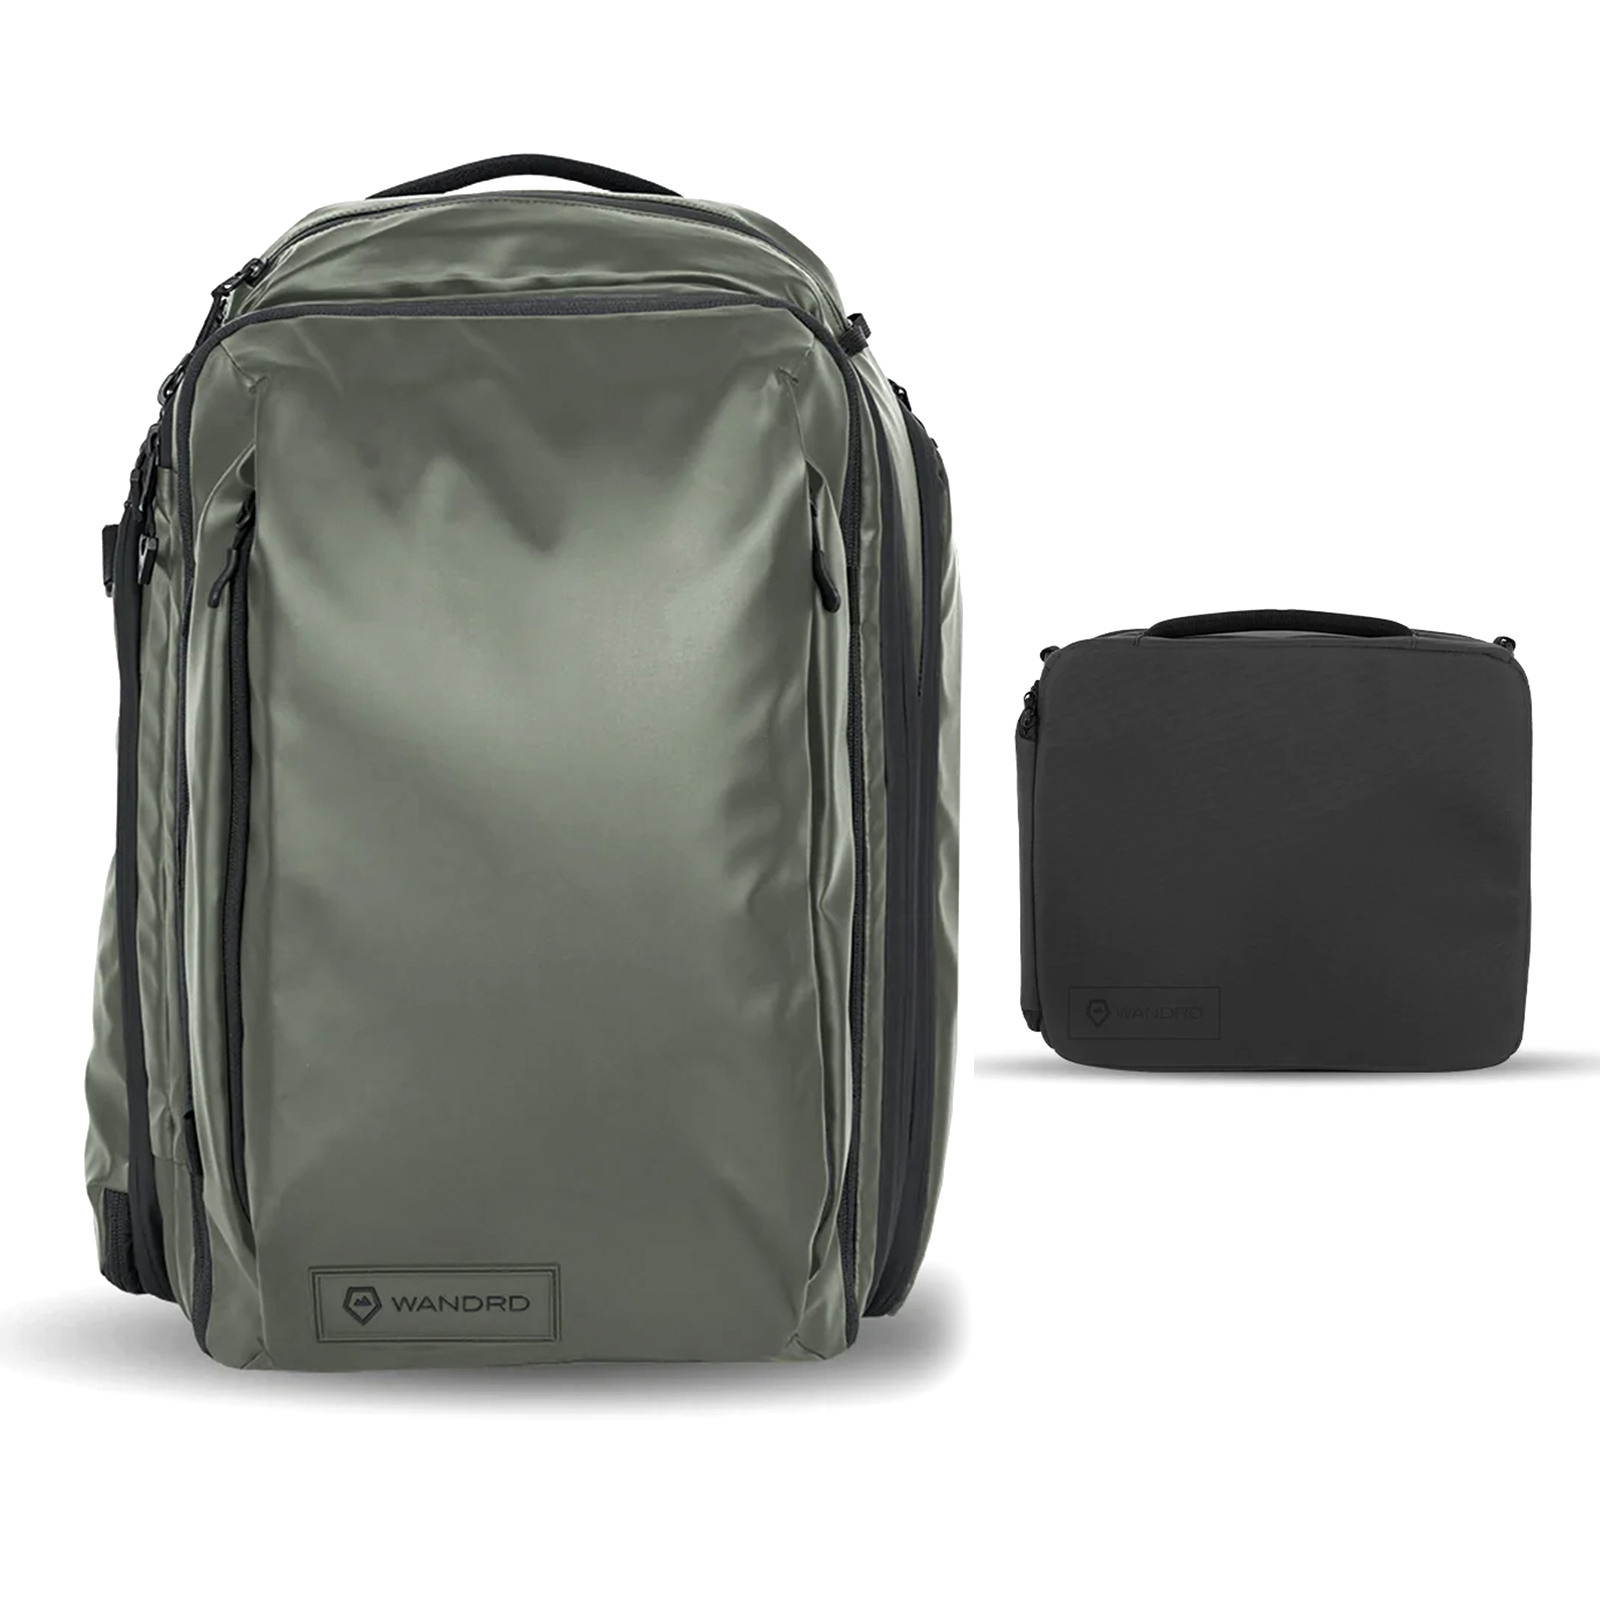 WANDRD Transit 45L Travel Backpack Essential+ Bundle - Wasatch Green